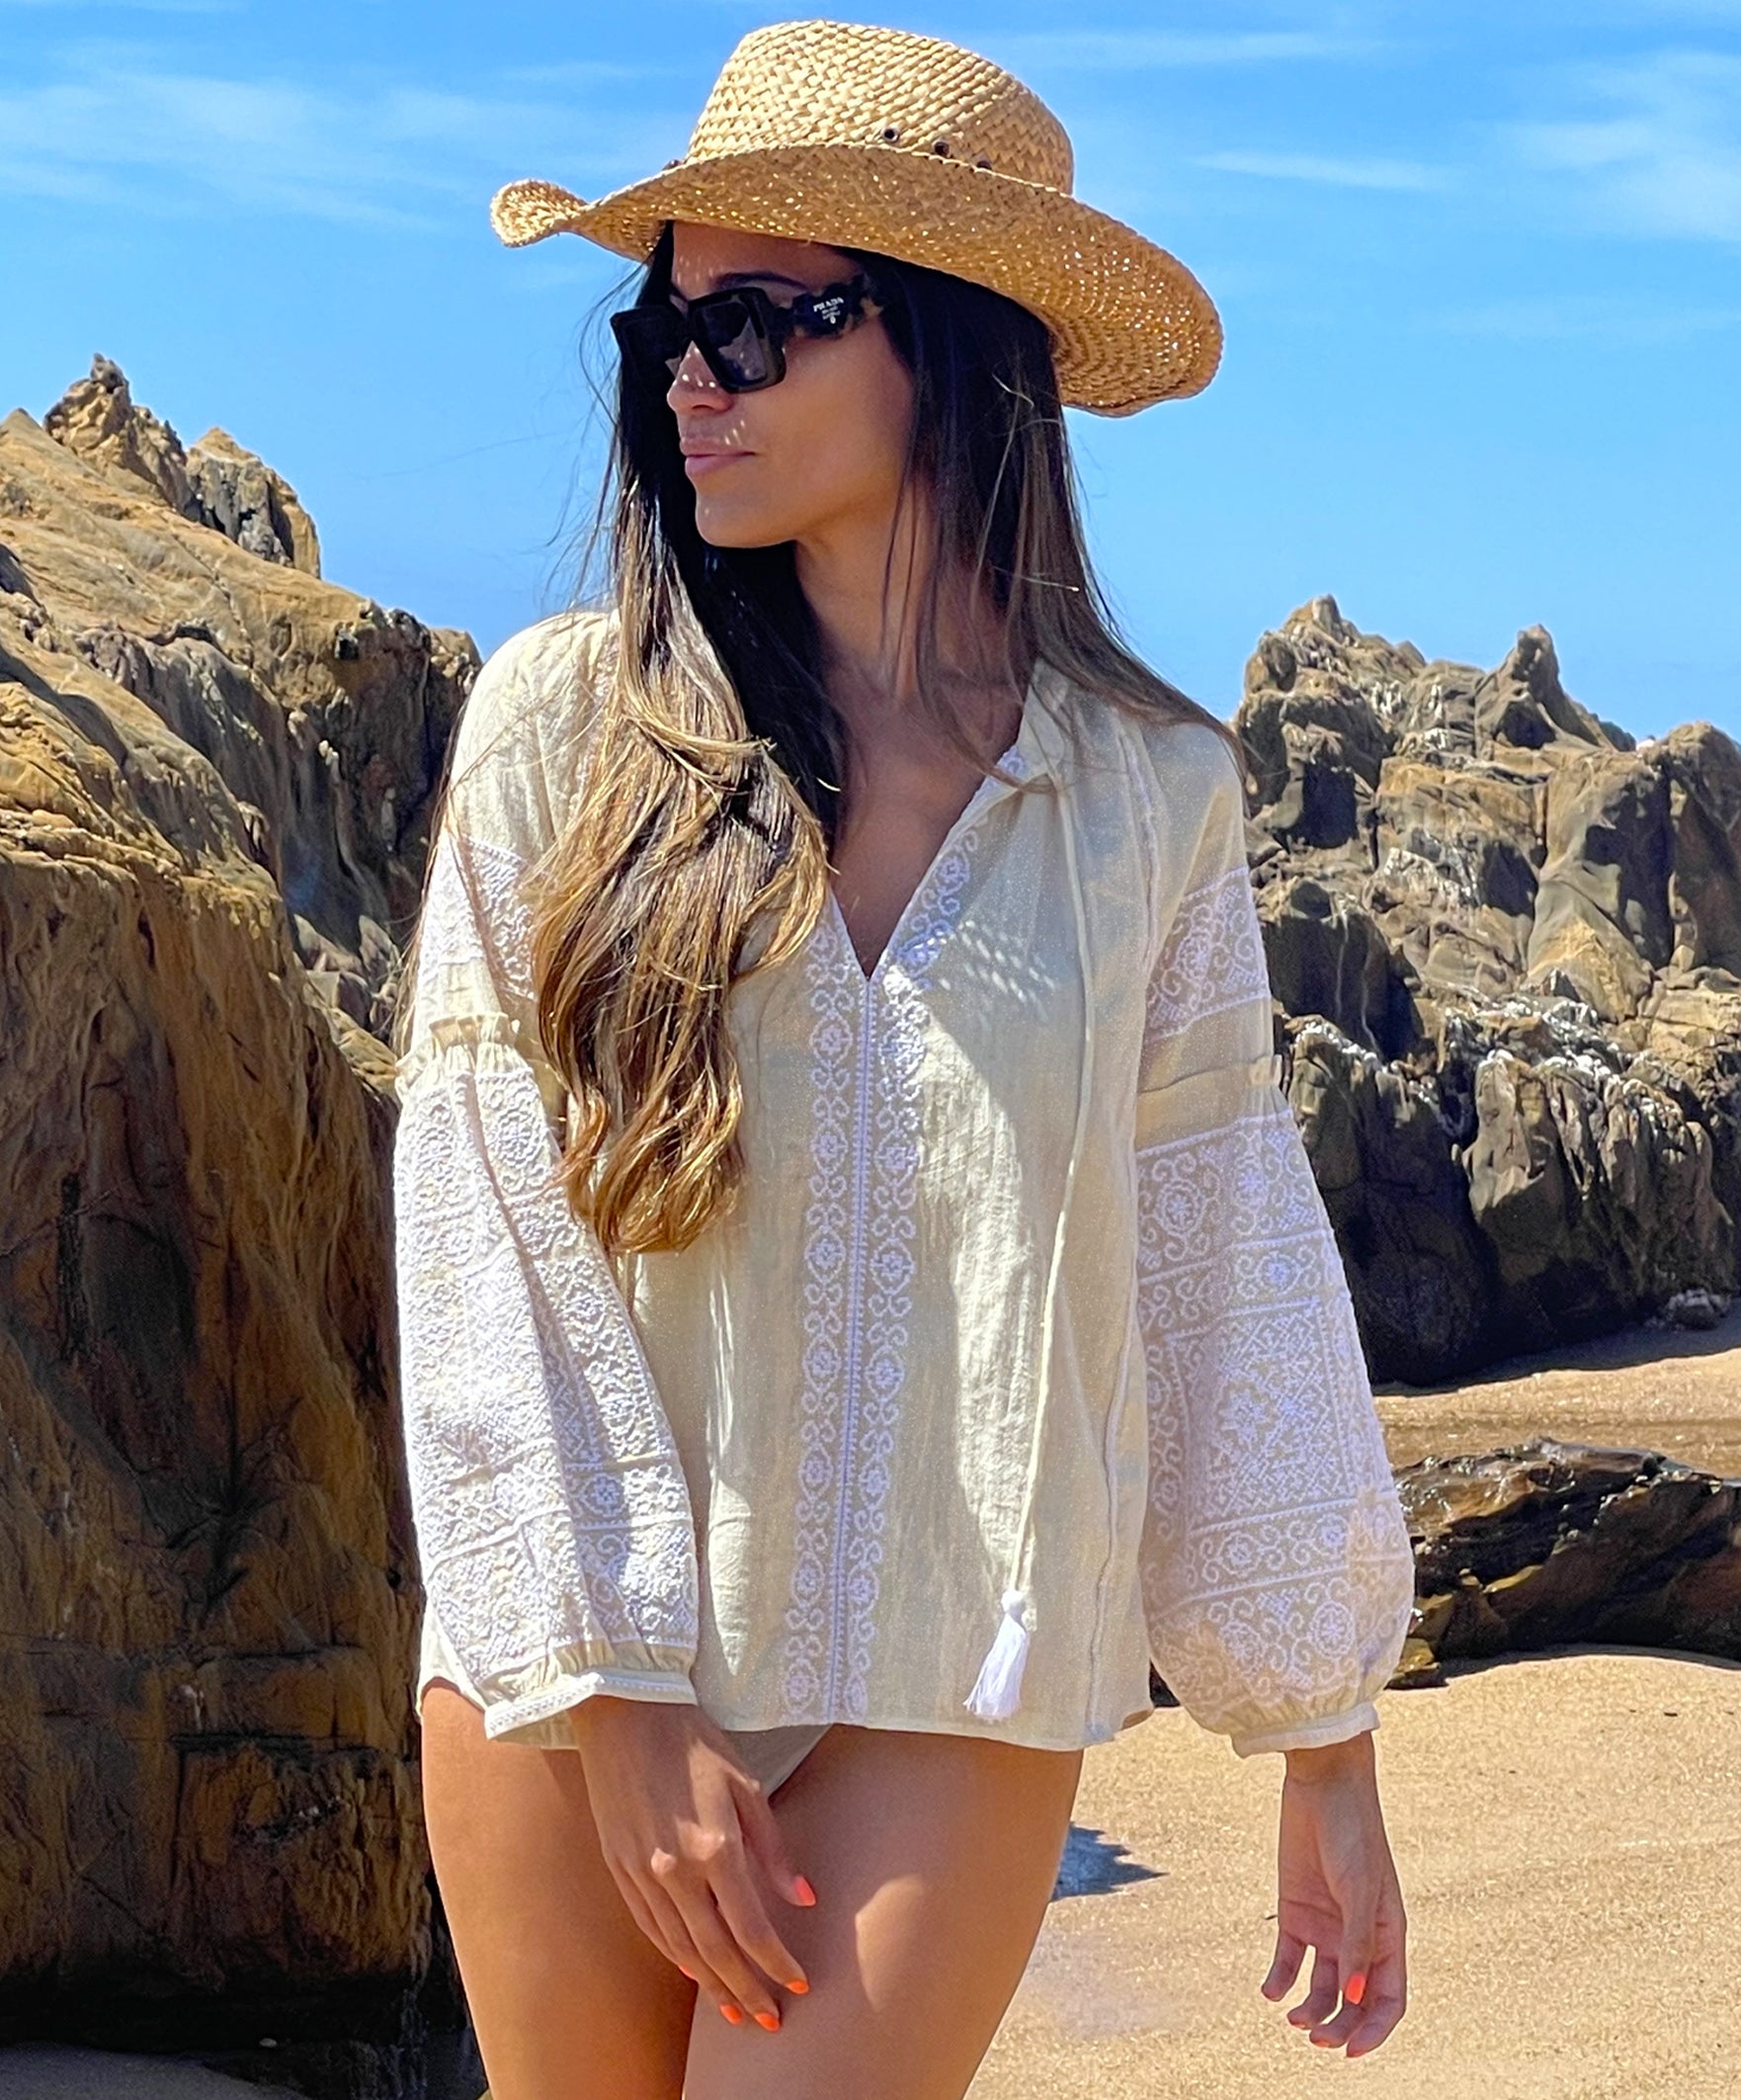 A model on a beach wearing the Rose and Rose gold lurex Capri embroidered top, straw cowboy hat and sunglasses.